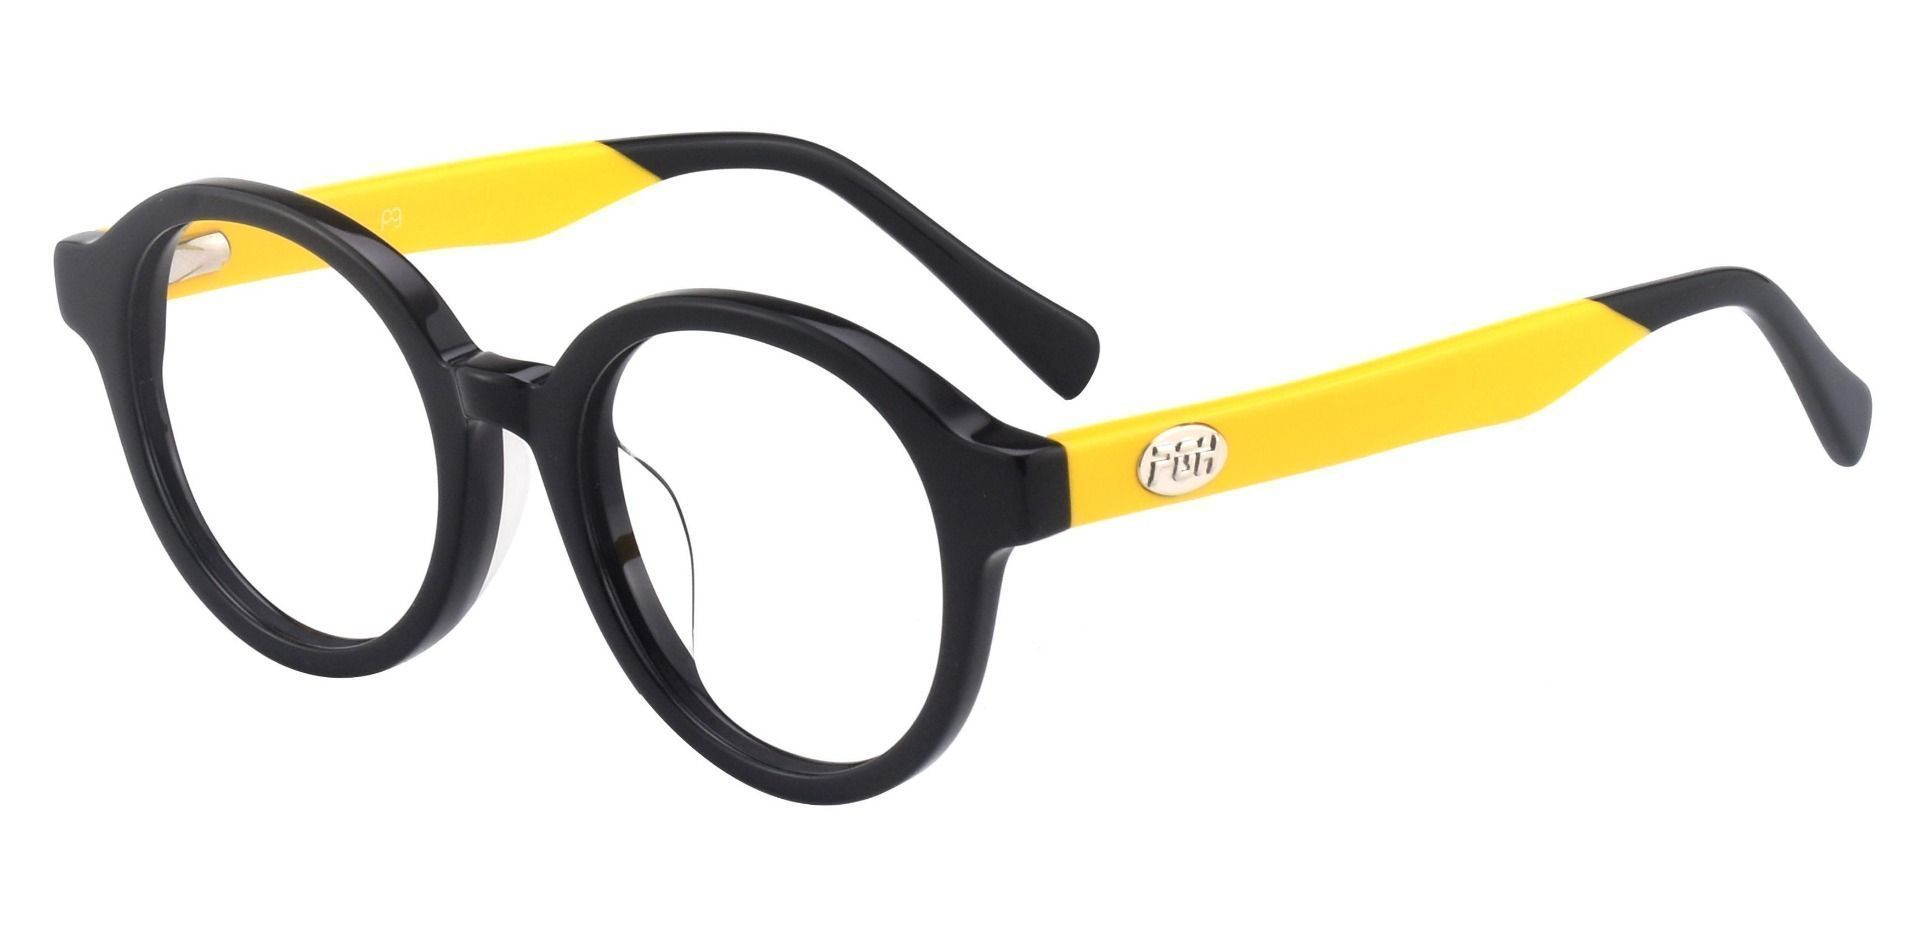 Champ Round Prescription Glasses - The Frame Is Black And Gold